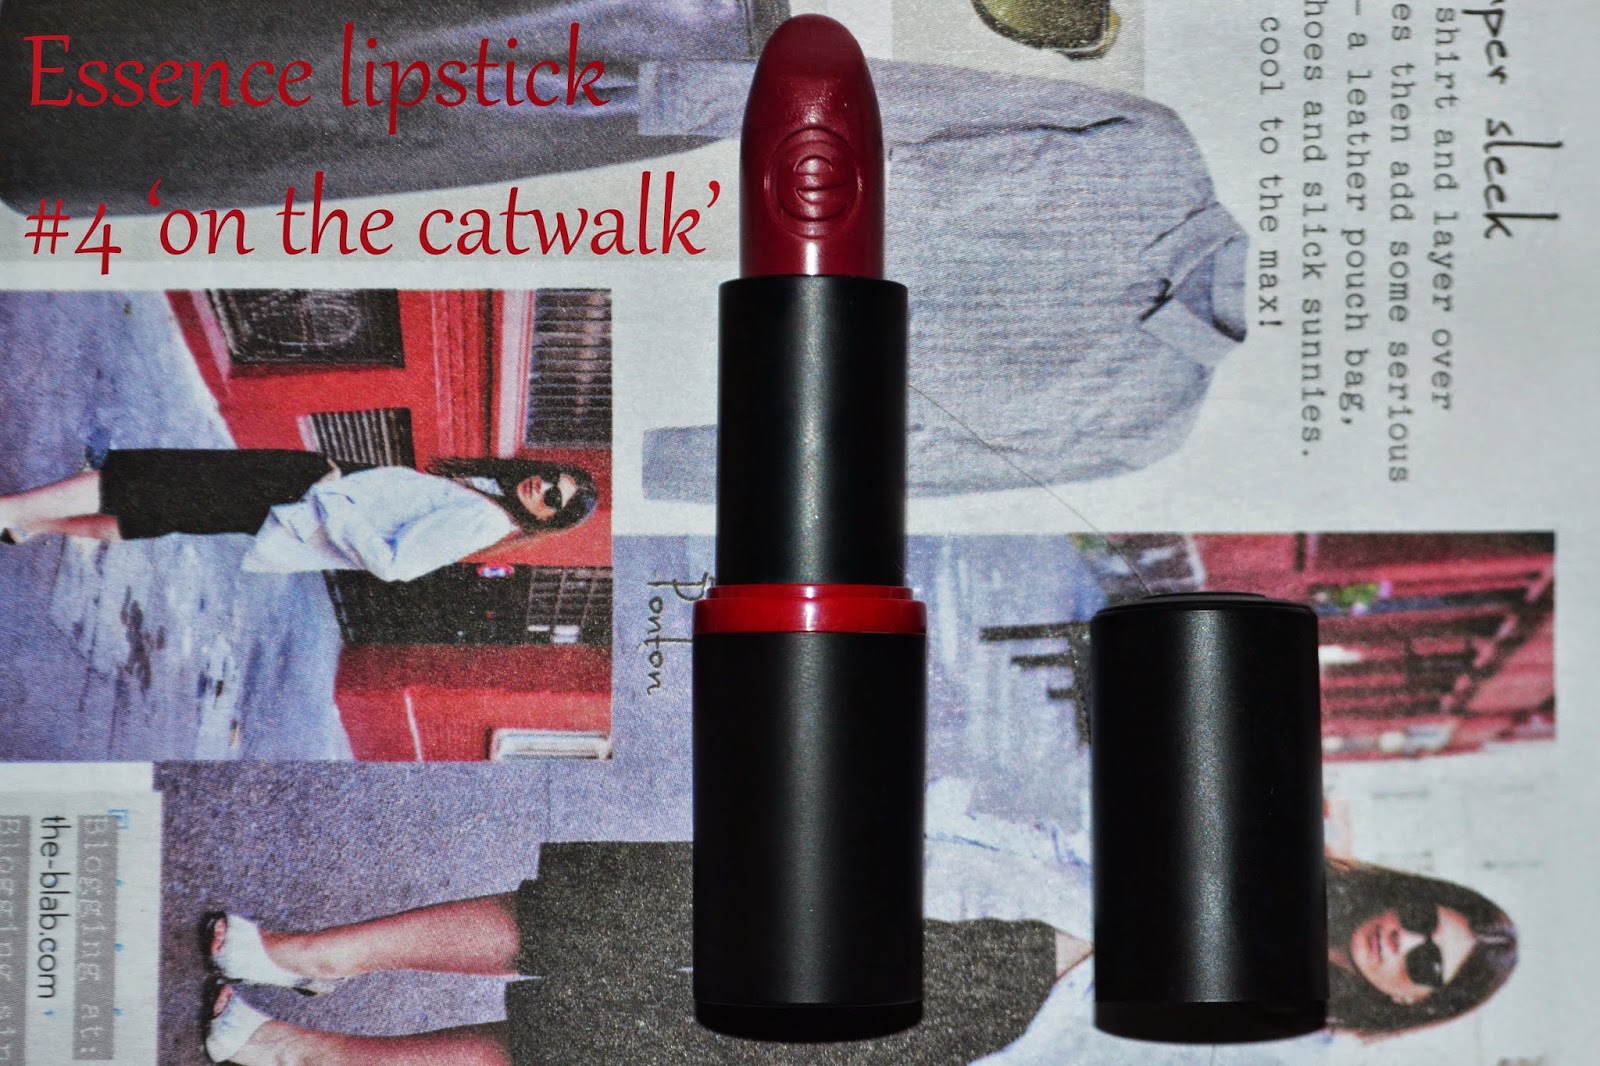 DEEP BERRY RED LIPSTICK IN A PLAIN BLACK TUBE